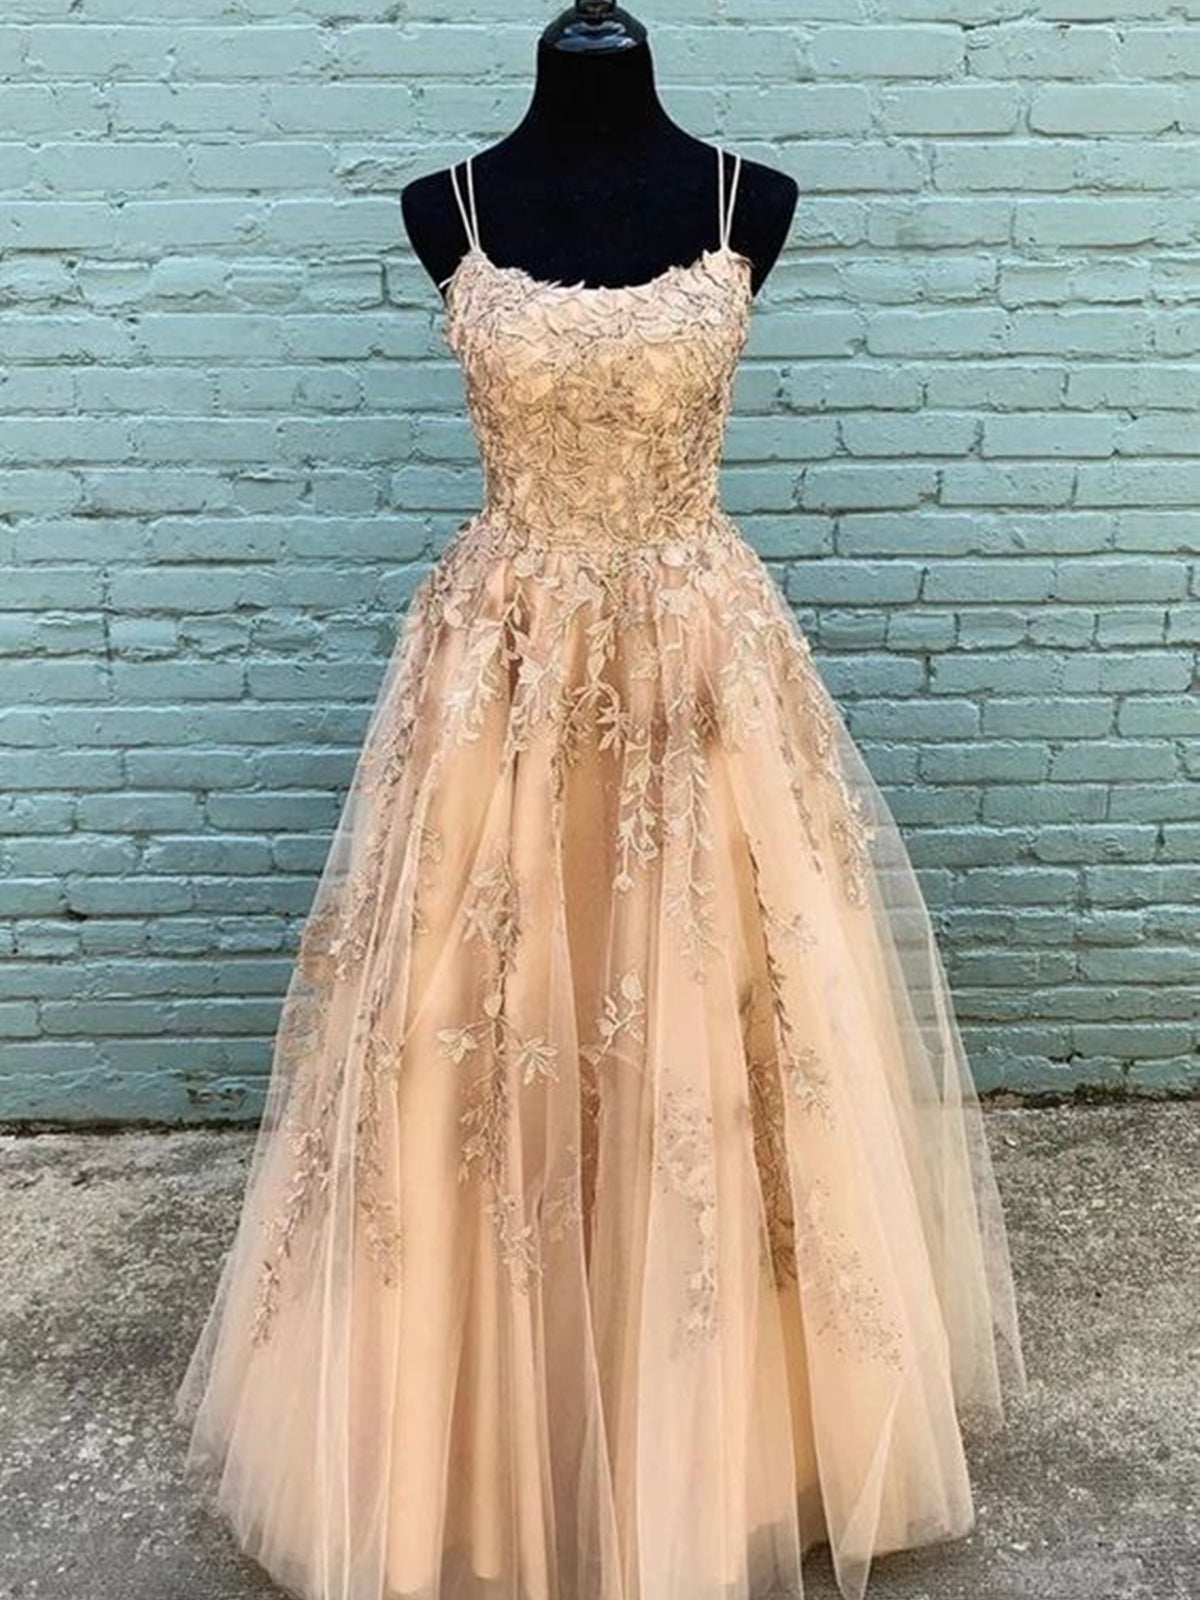 Homecoming Dresses Short Tight, Long Champagne Lace Prom Dresses, Champagne Lace Formal Graduation Dresses